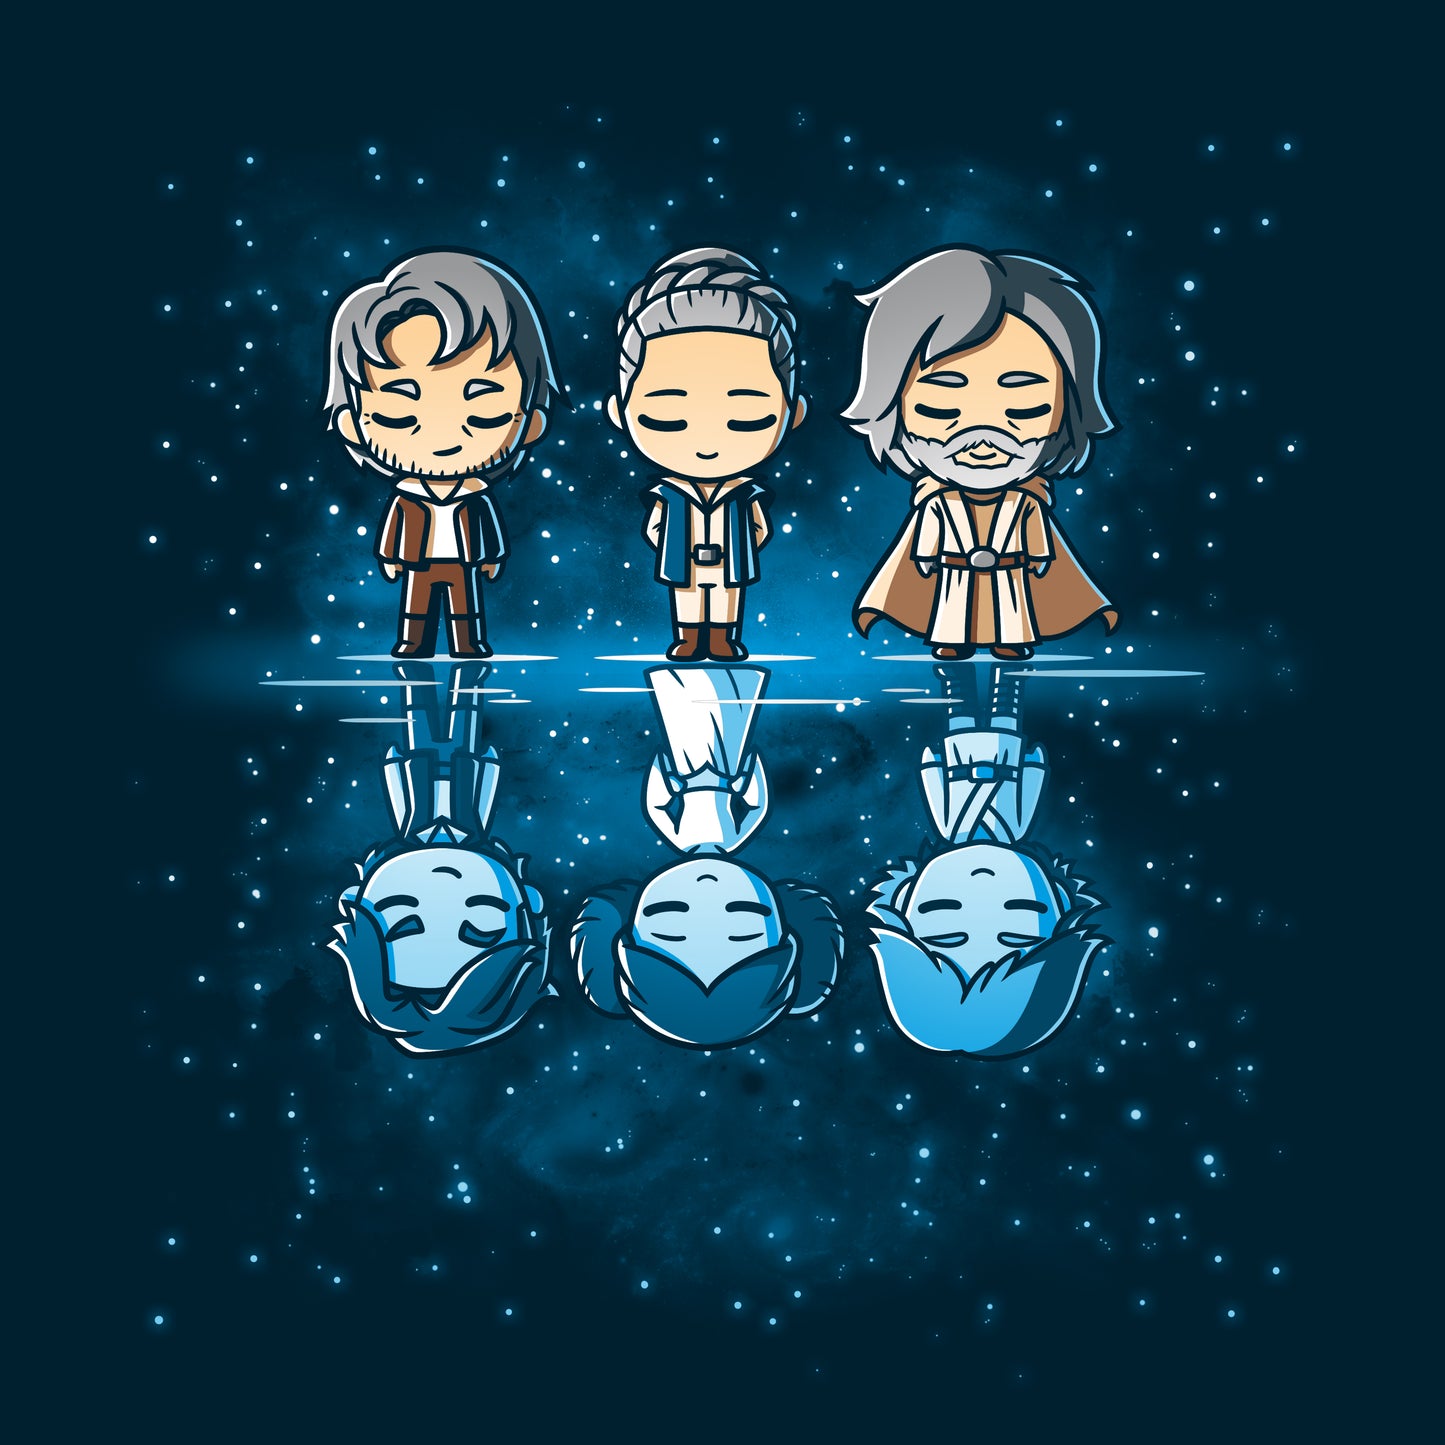 Three officially licensed Star Wars characters standing in front of a starry sky on the Reflections of Youth men's or women's t-shirt.